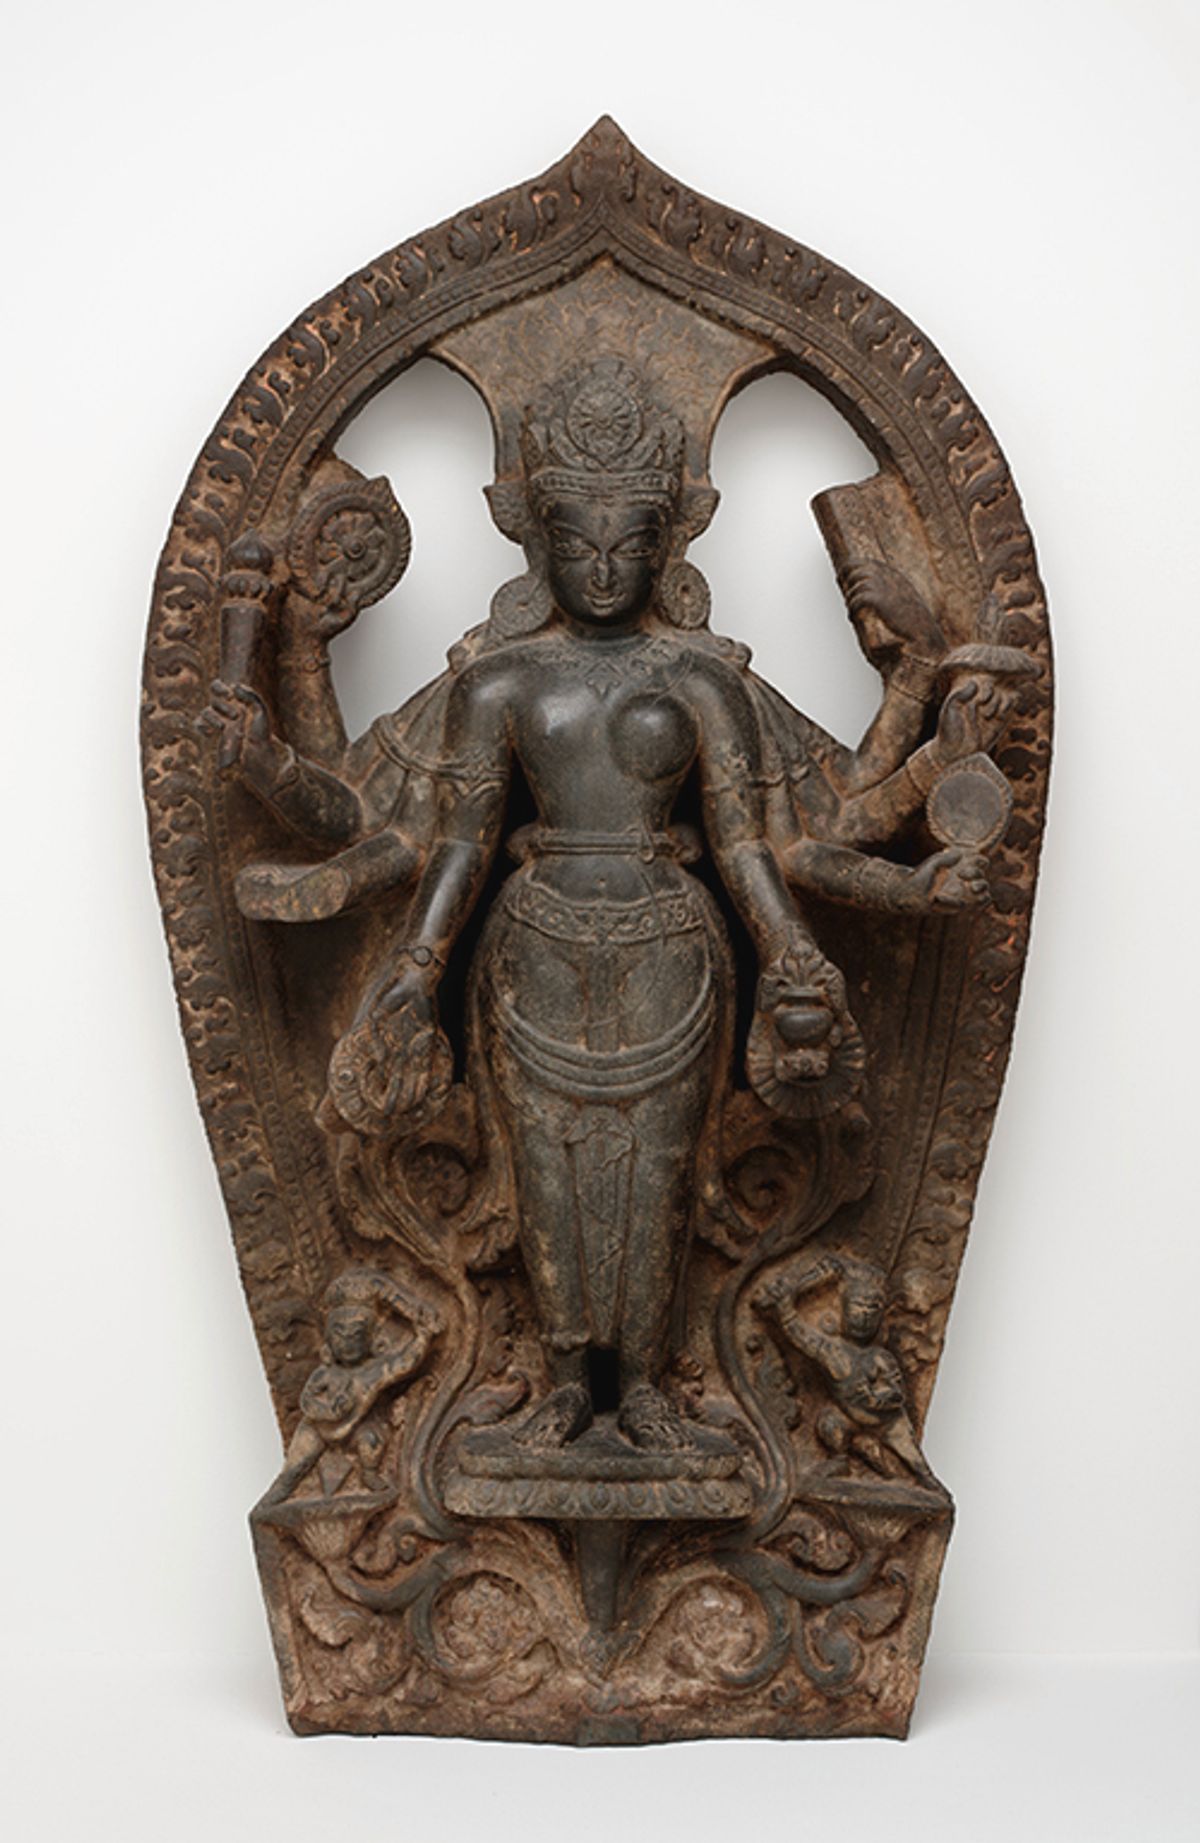 The eight-armed Stele of Lakshmi-Narayana from around the 10th or 11th century,  depicting two Hindu deities in an amalgam Courtesy of the Dallas Museum of Art